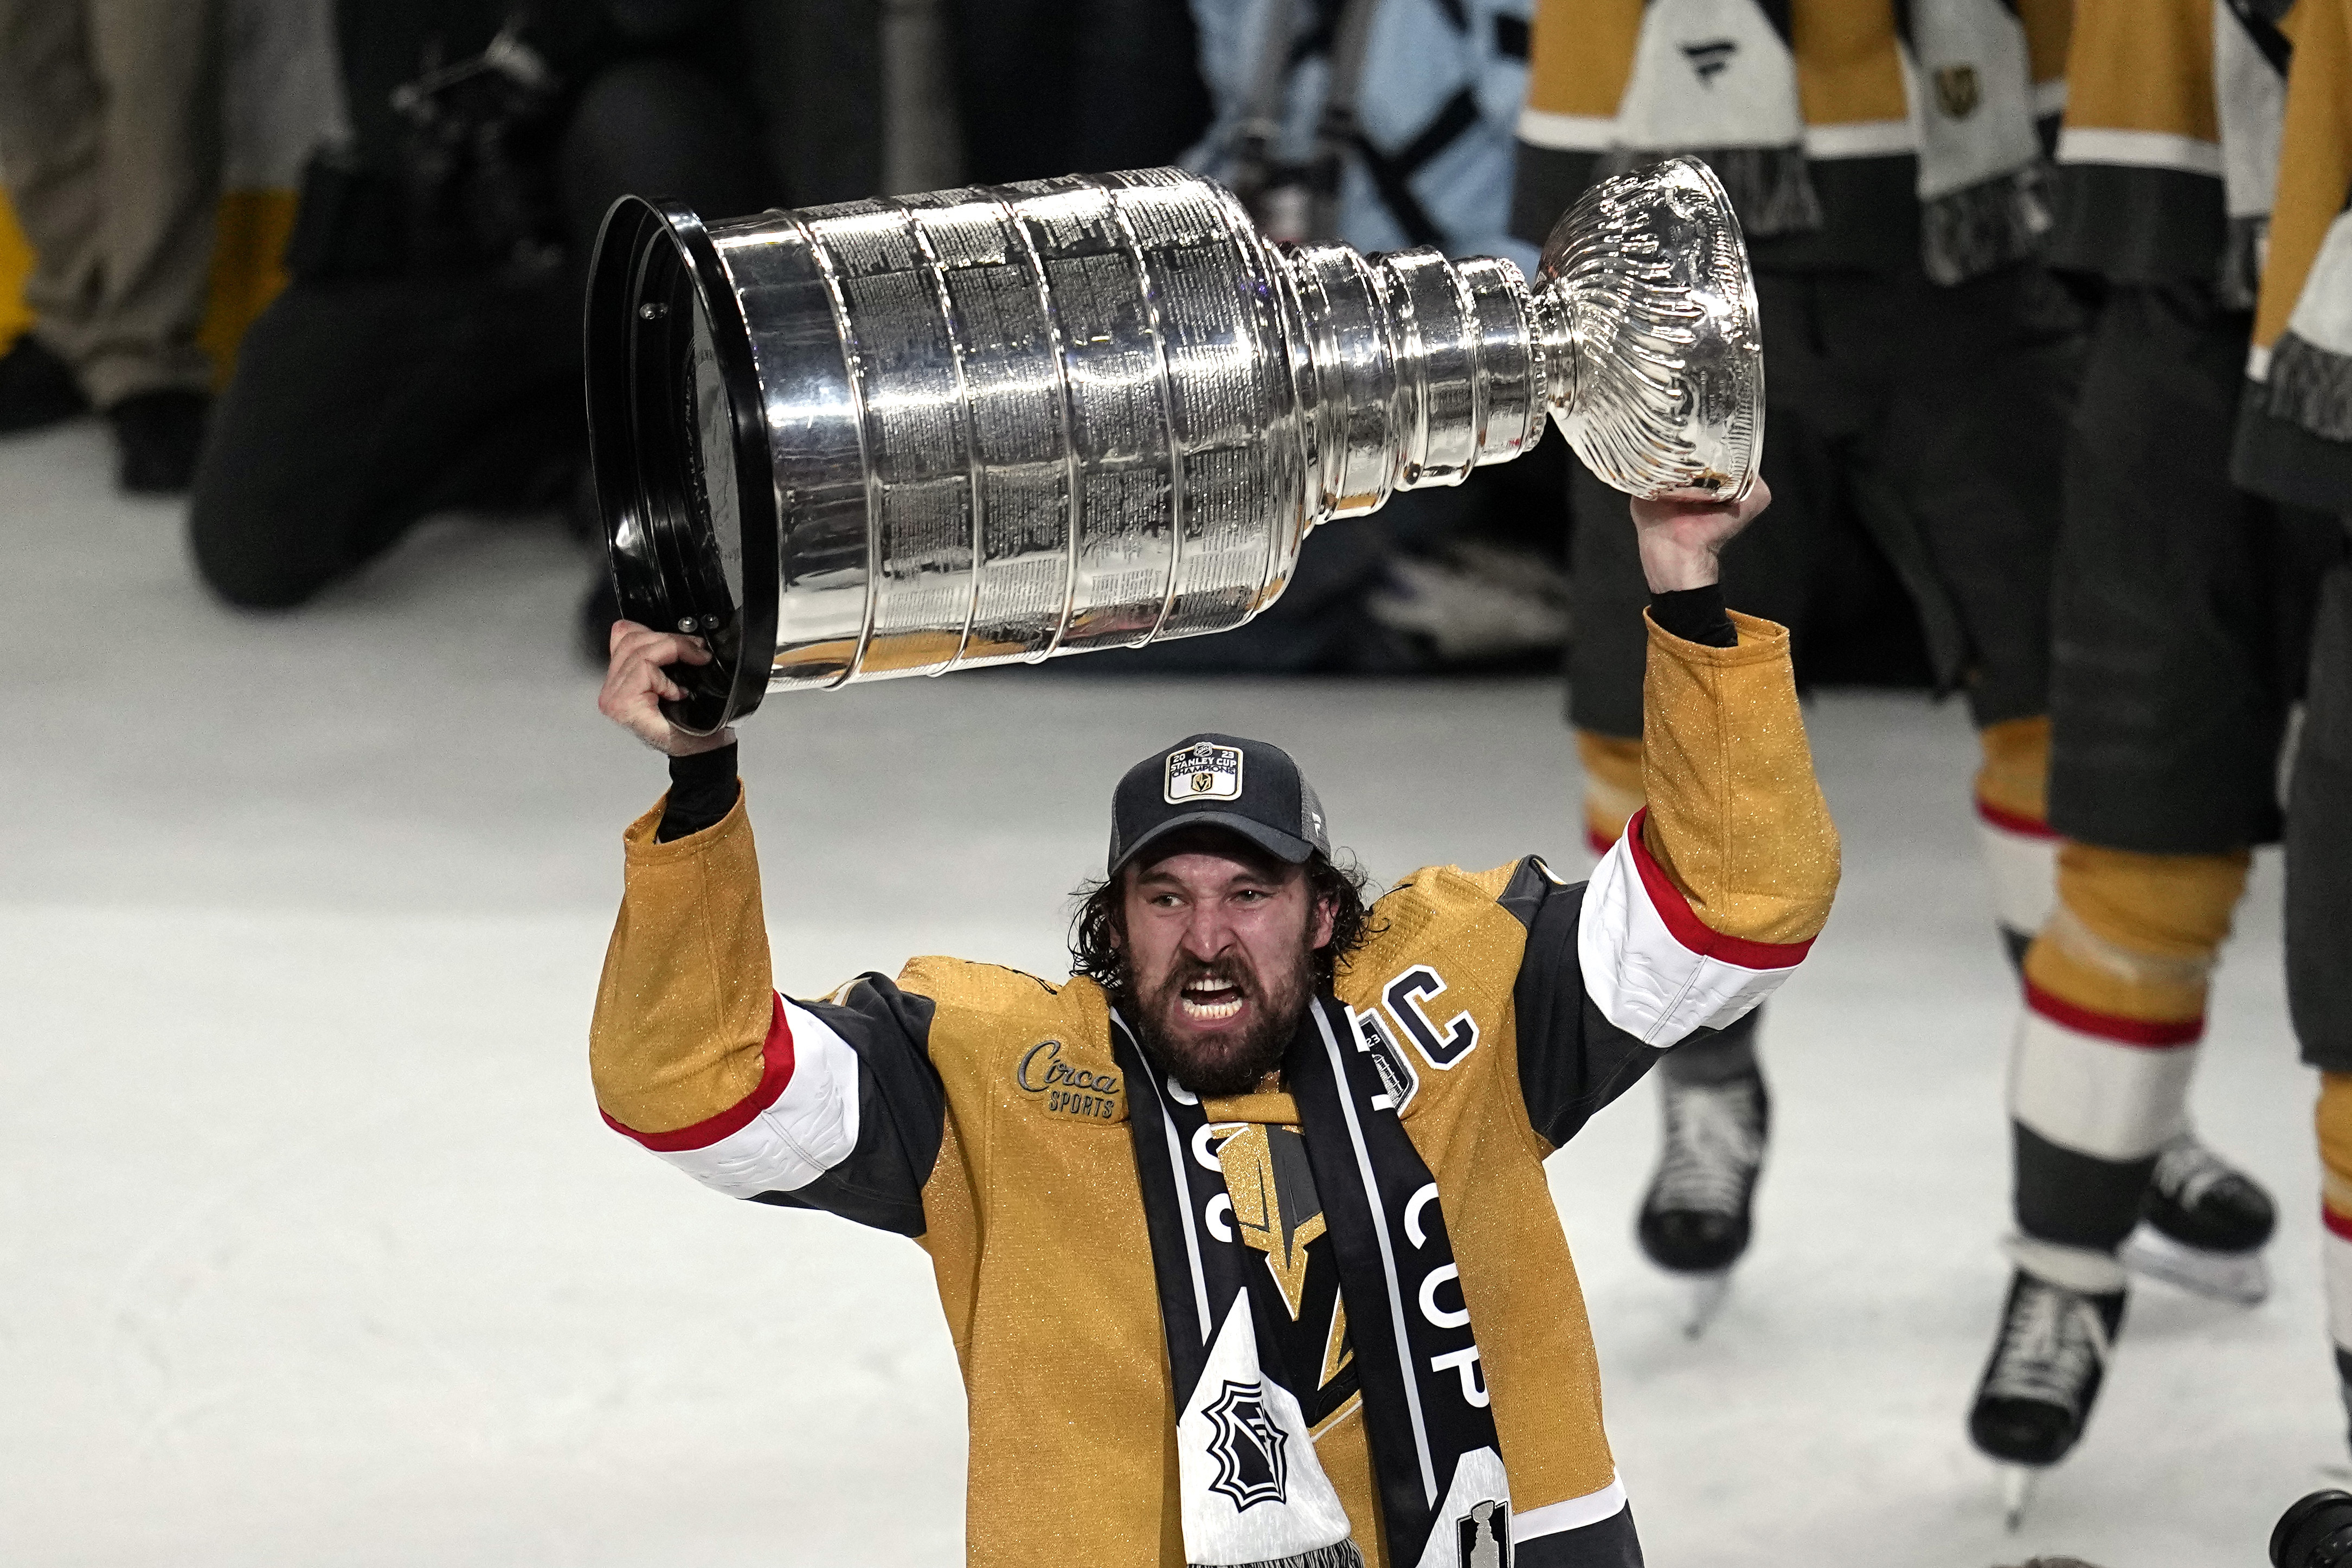 Are you a proud Stanley cup owner? We want to hear from you